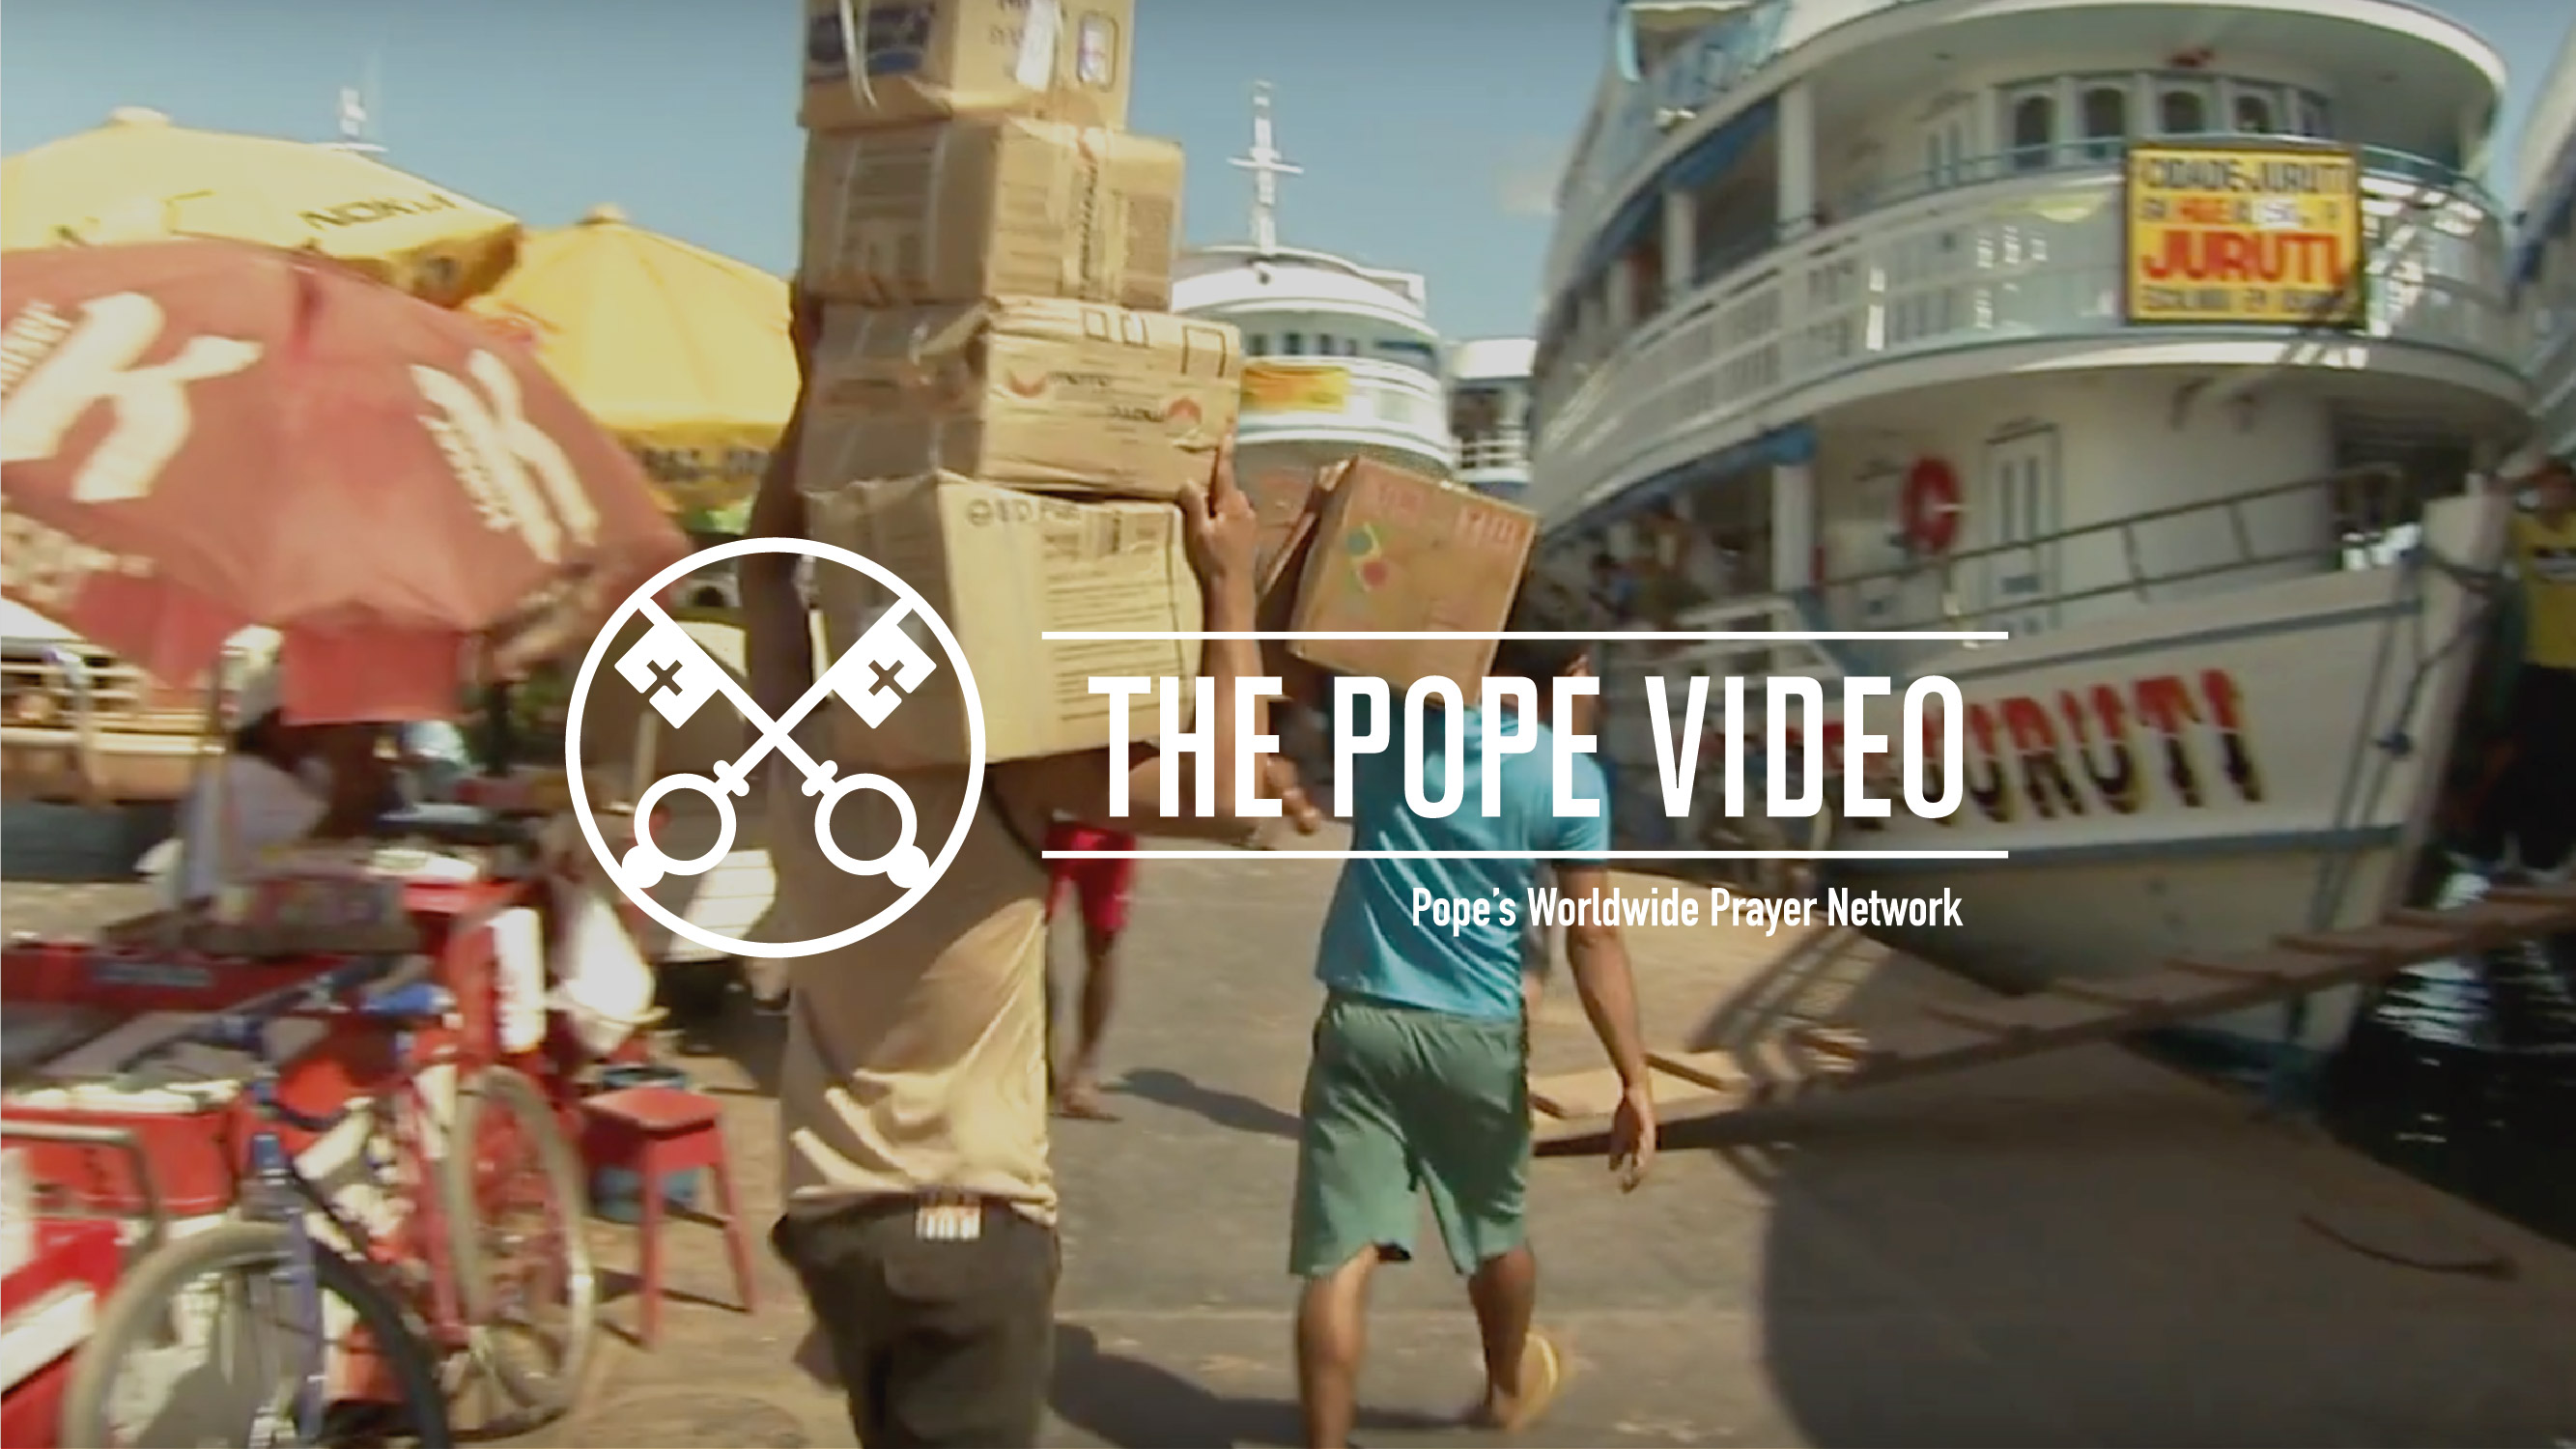 The Pope Video October 2017 (Official Image)